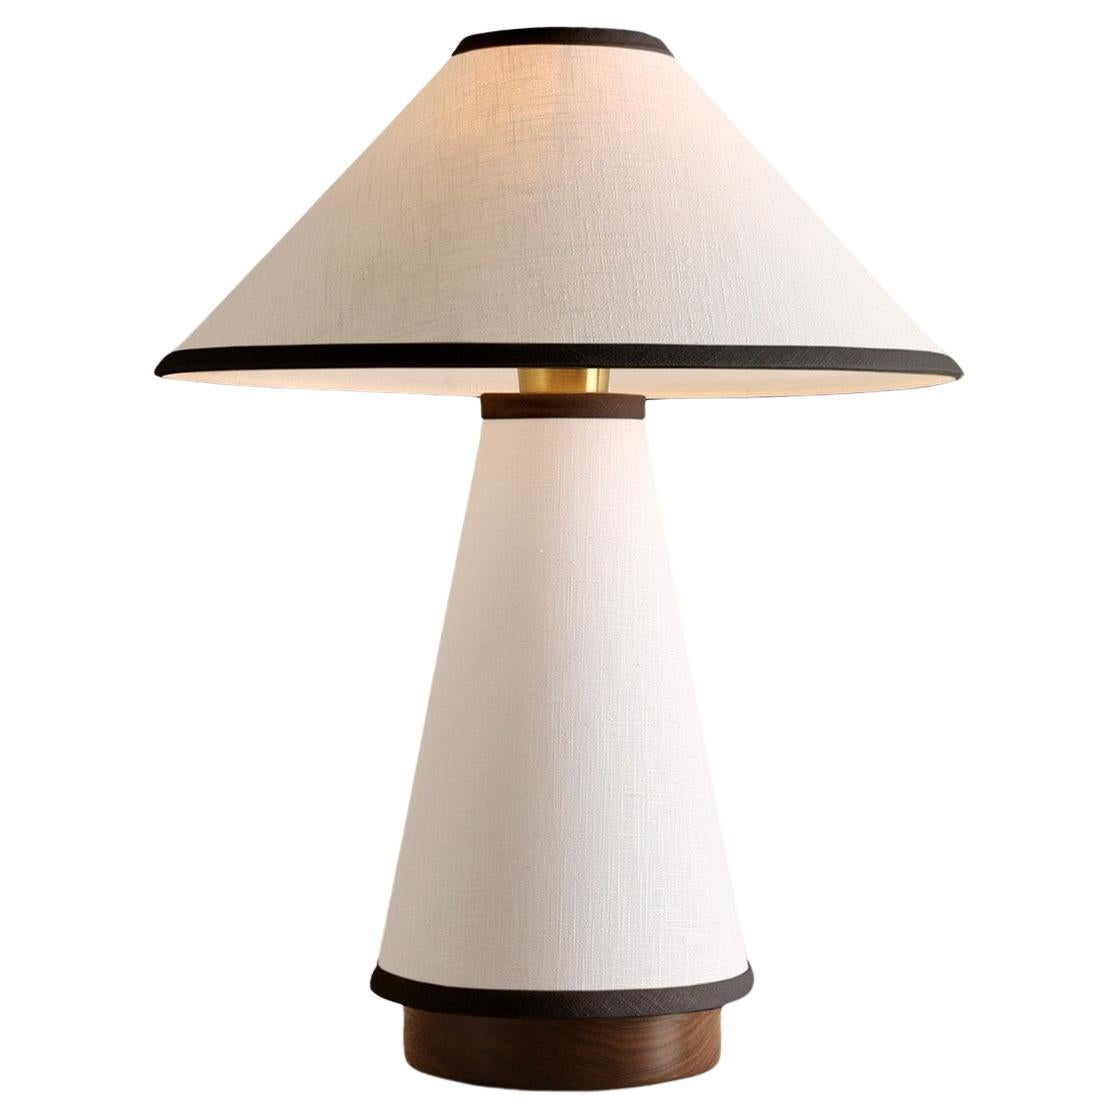 Linden Table Lamp Short, with Cream Linen and Black Trim by Studio DUNN For Sale